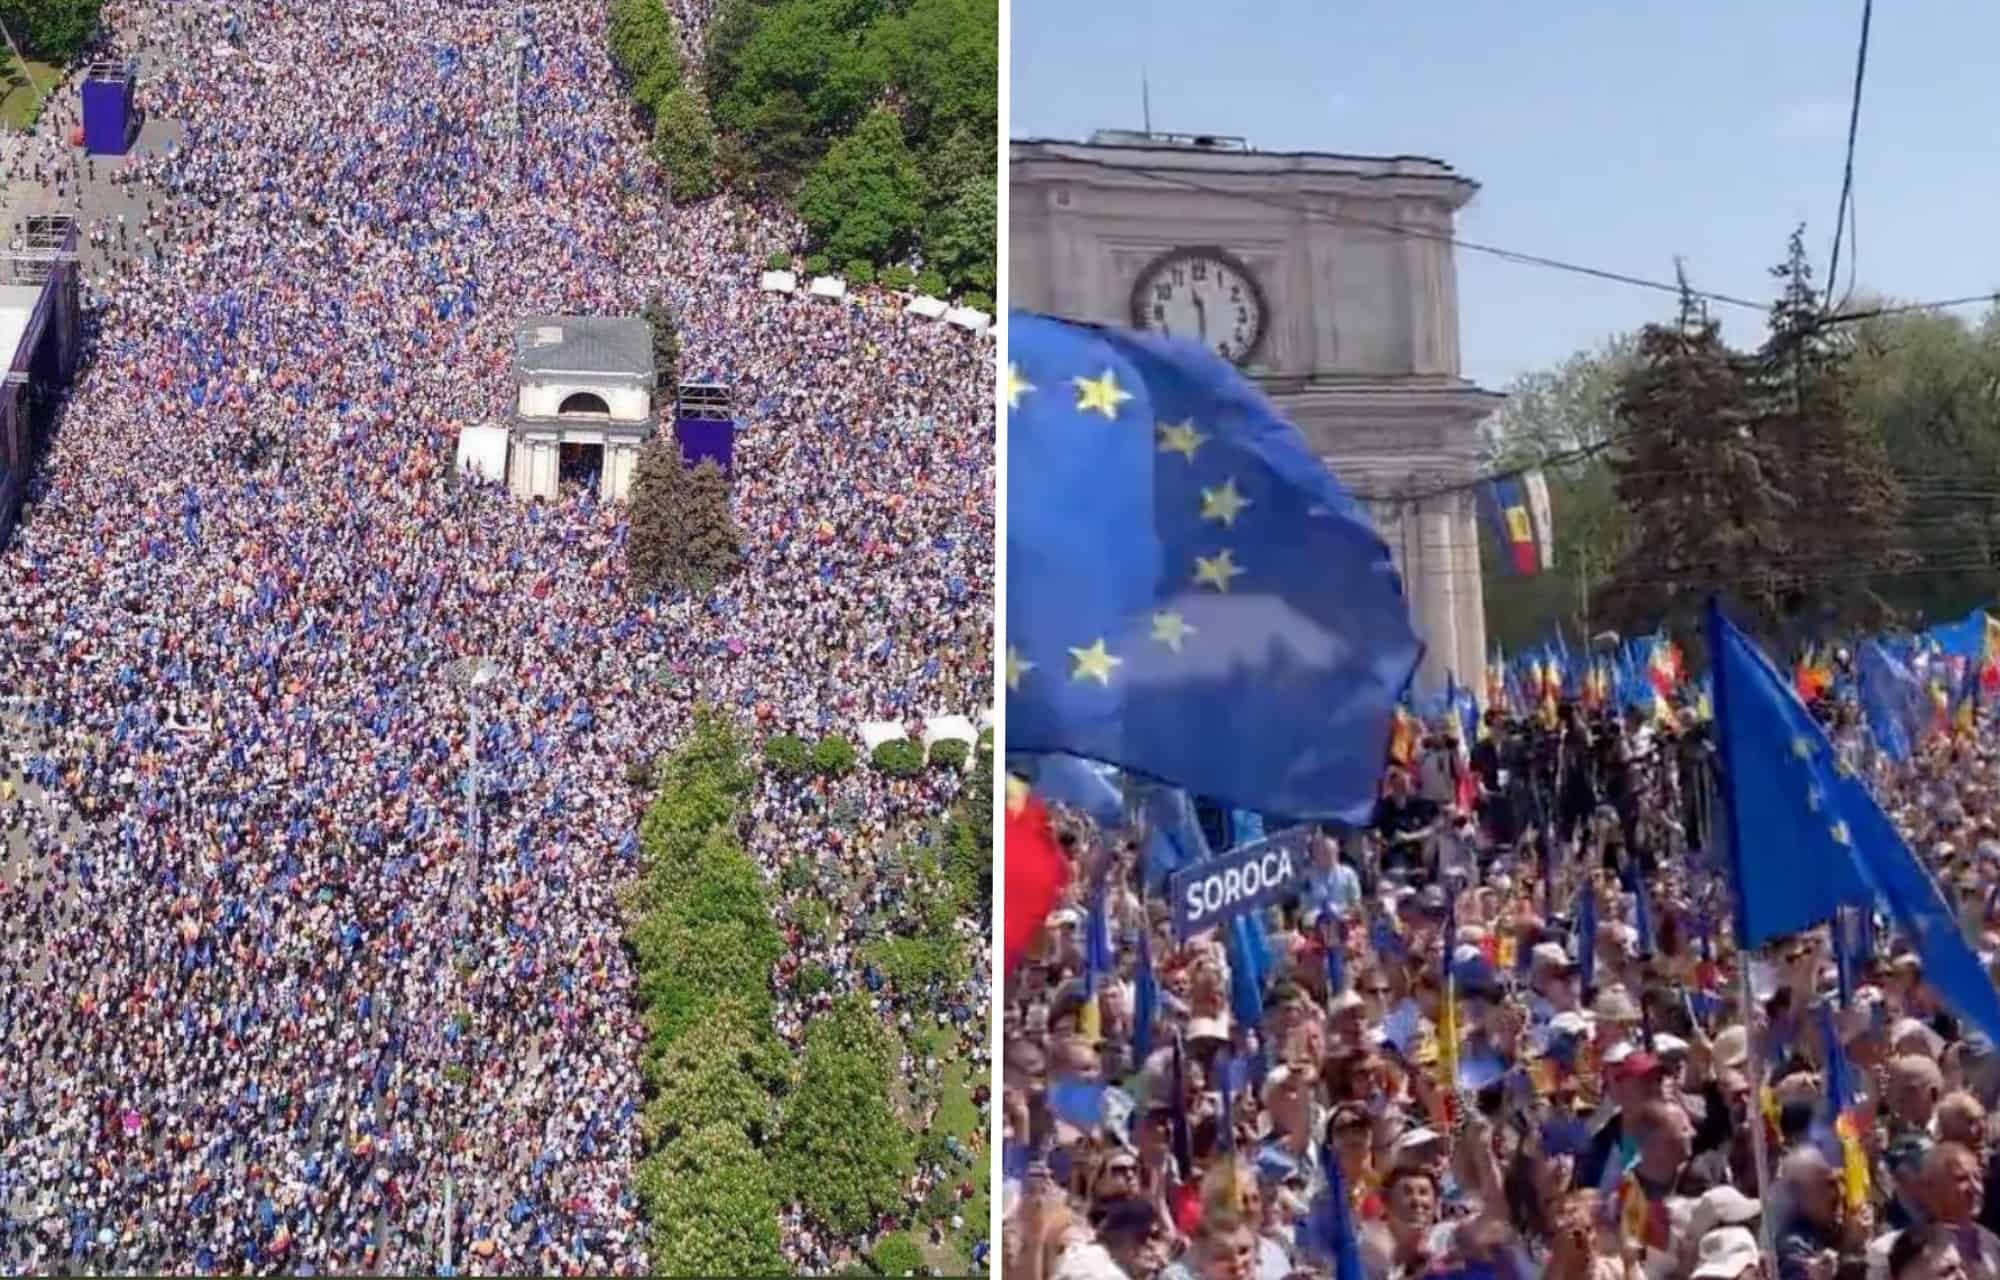 Watch: Thousands take to the streets in Moldova for pro-EU marches